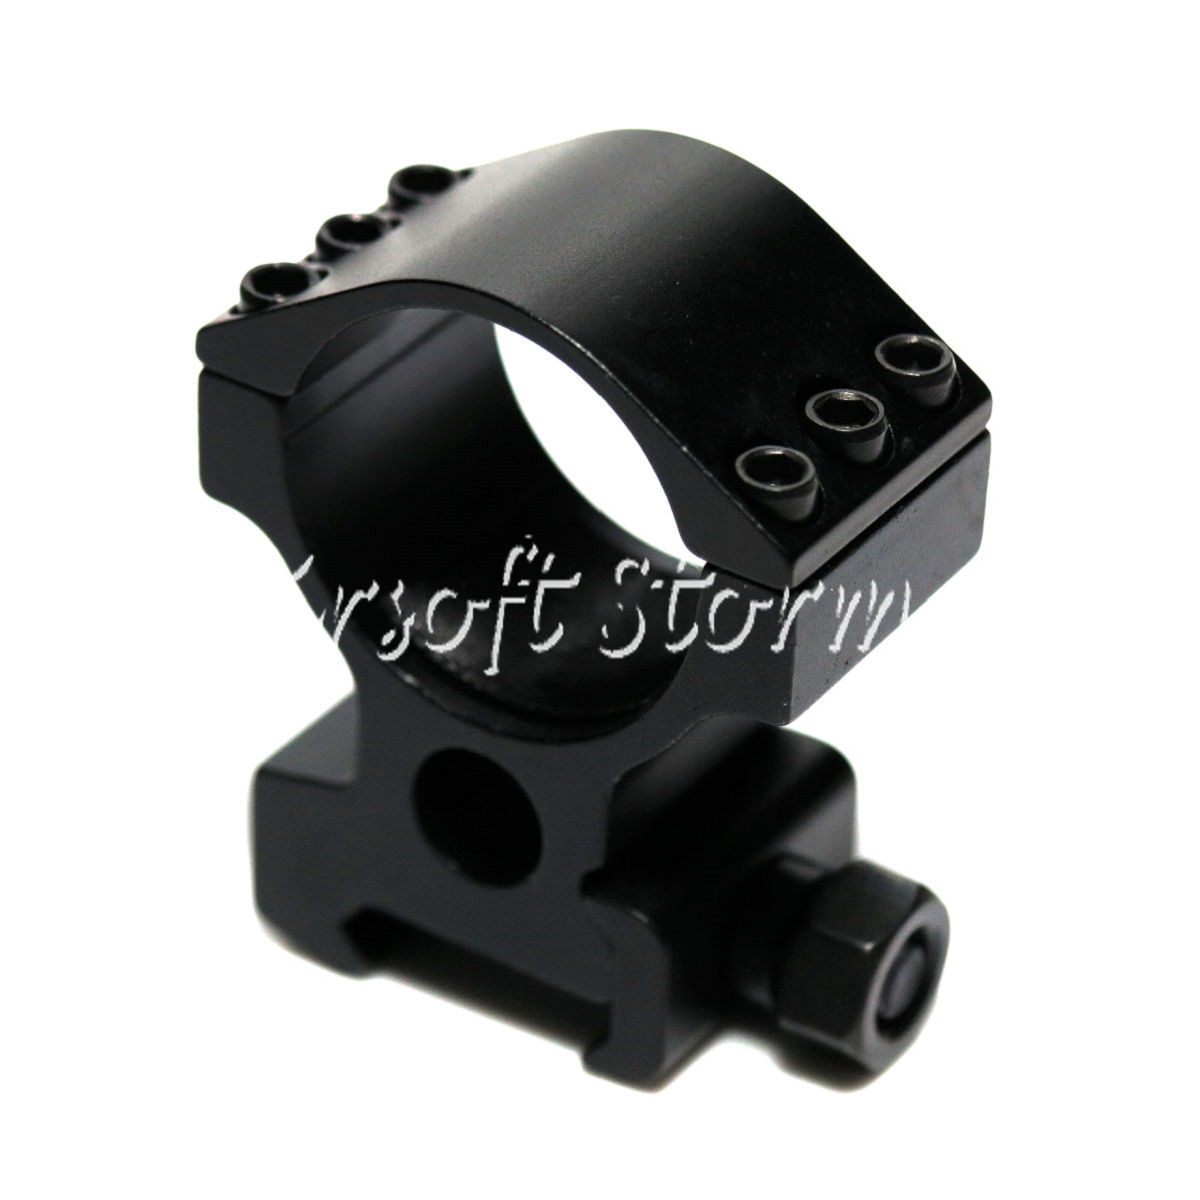 Tactical Shooting Gear 30mm See Through Knight Scope QD Ring Mount